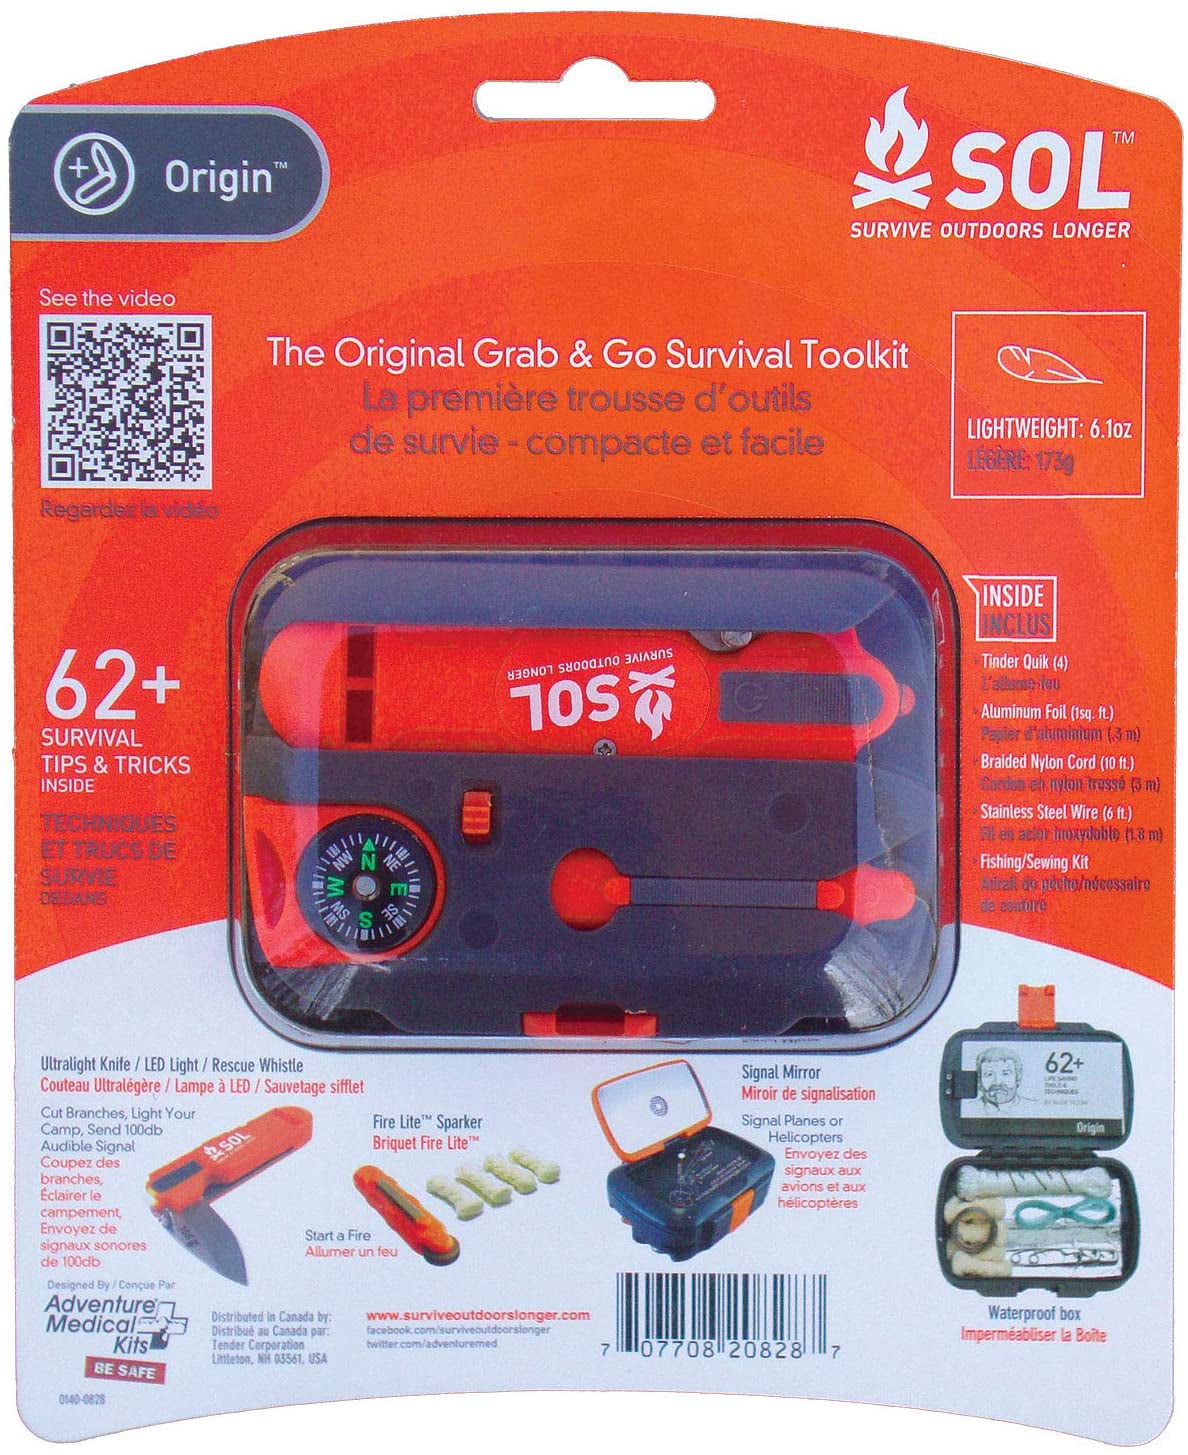 What's in my survival kit? — Dug North – Cool Tools